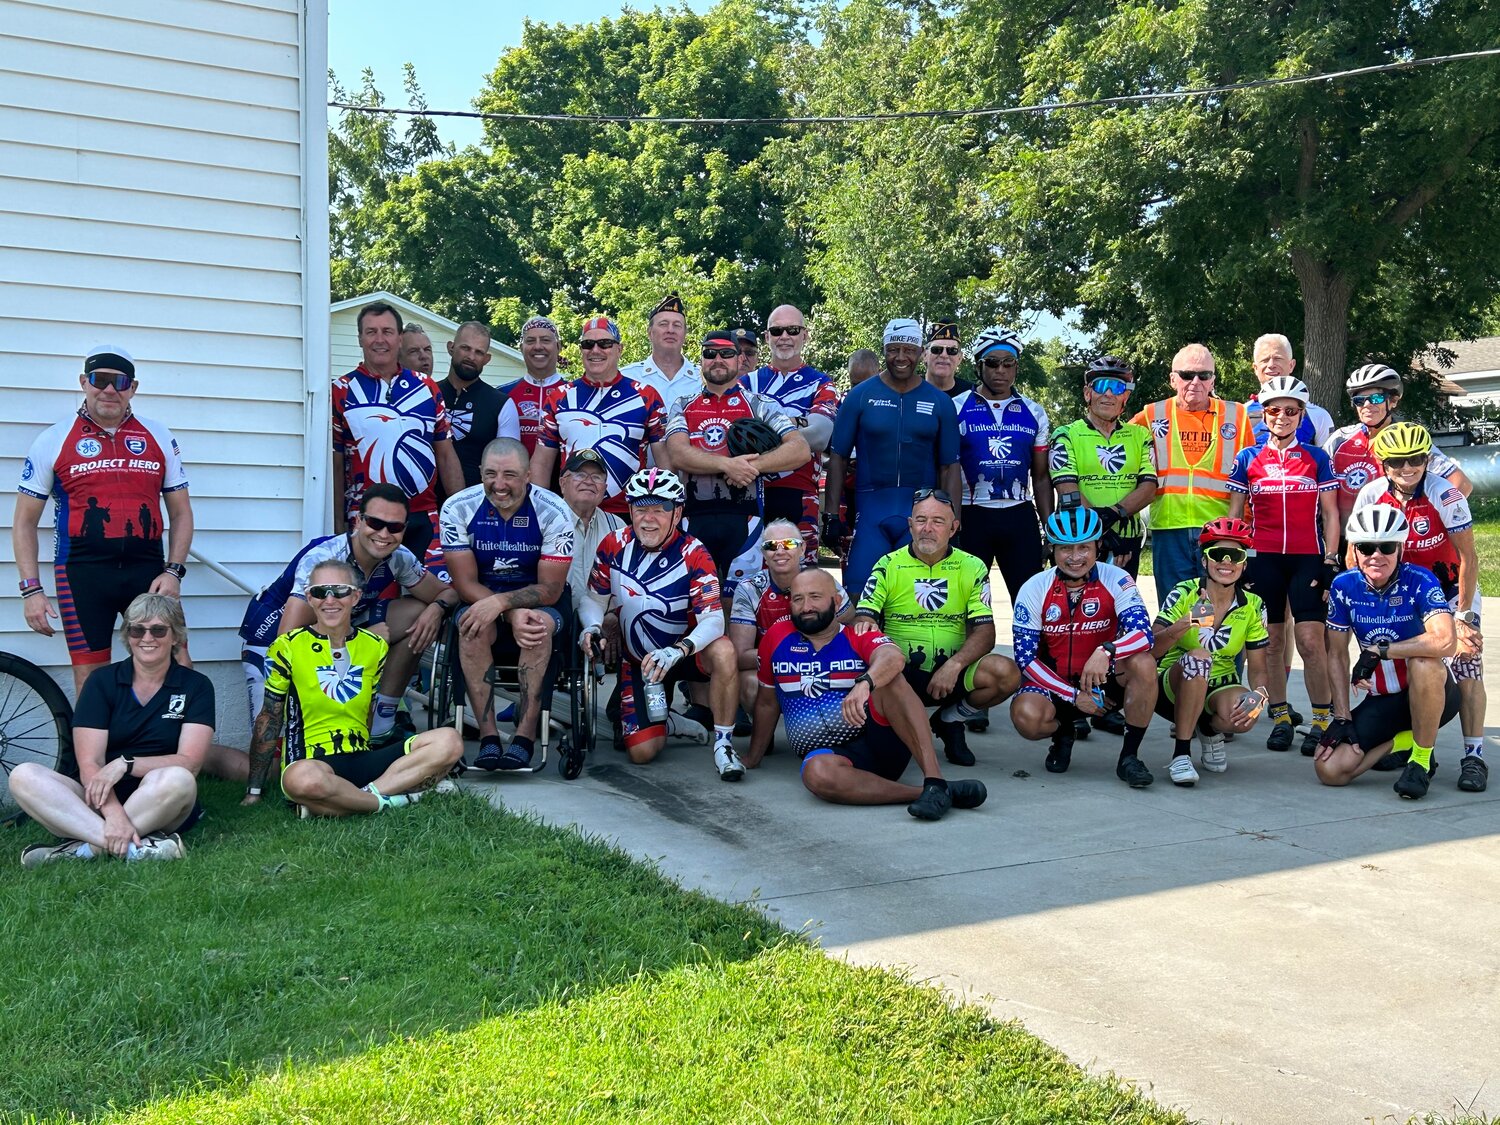 Group at Bellechester Community Center, includes HERO riders and Bellechester American Legion members.